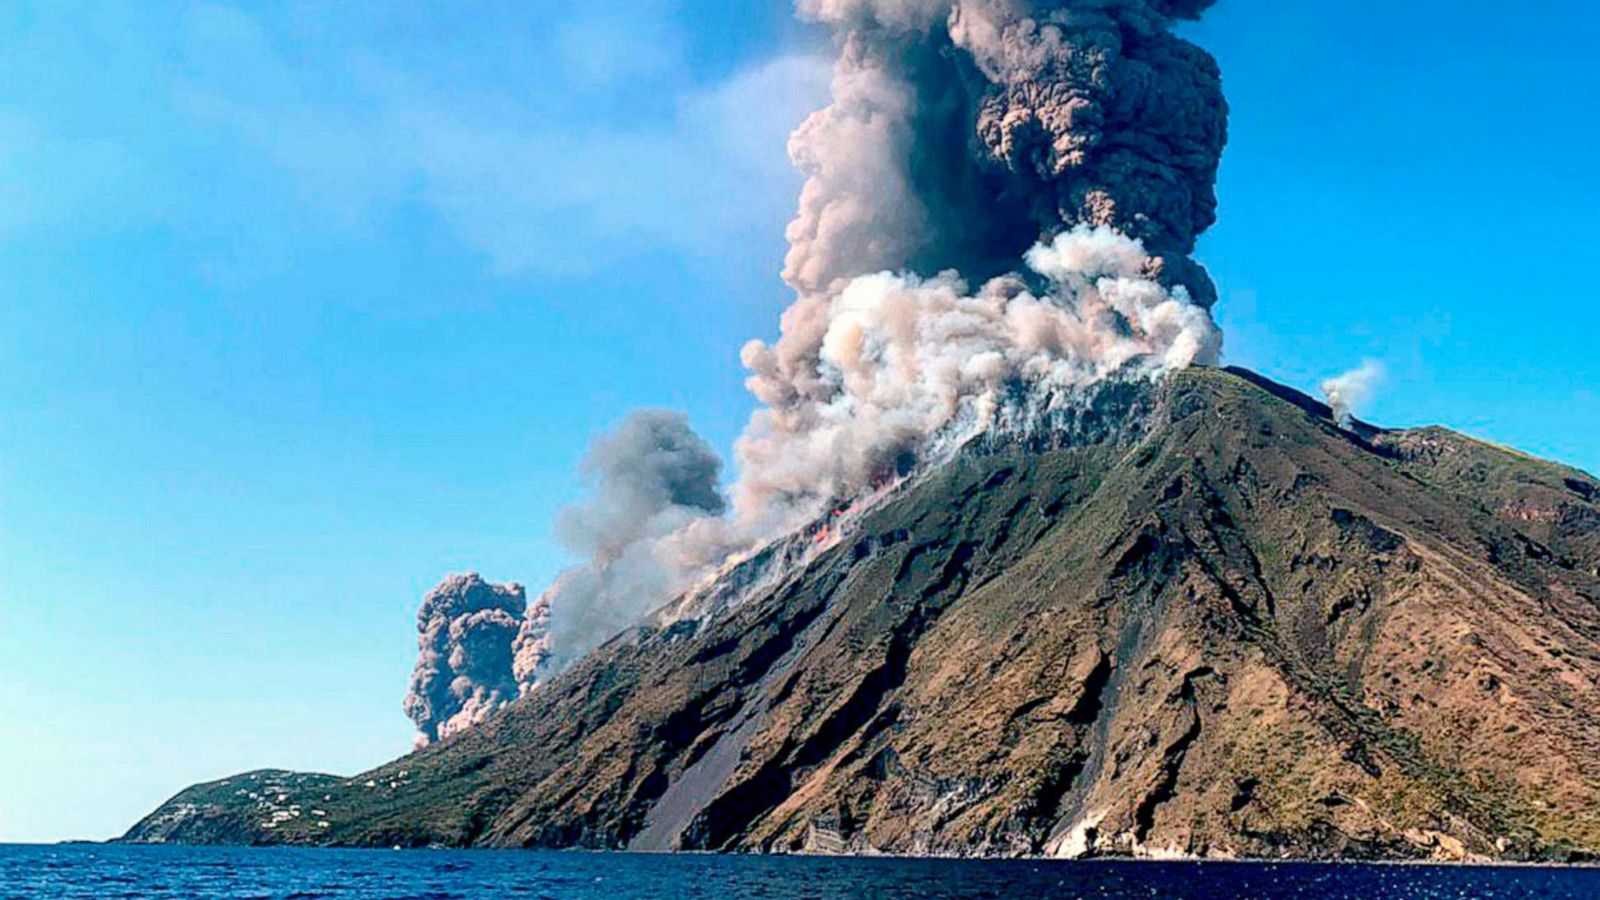 Check Out Everything There Is to Know About the Stromboli Volcano